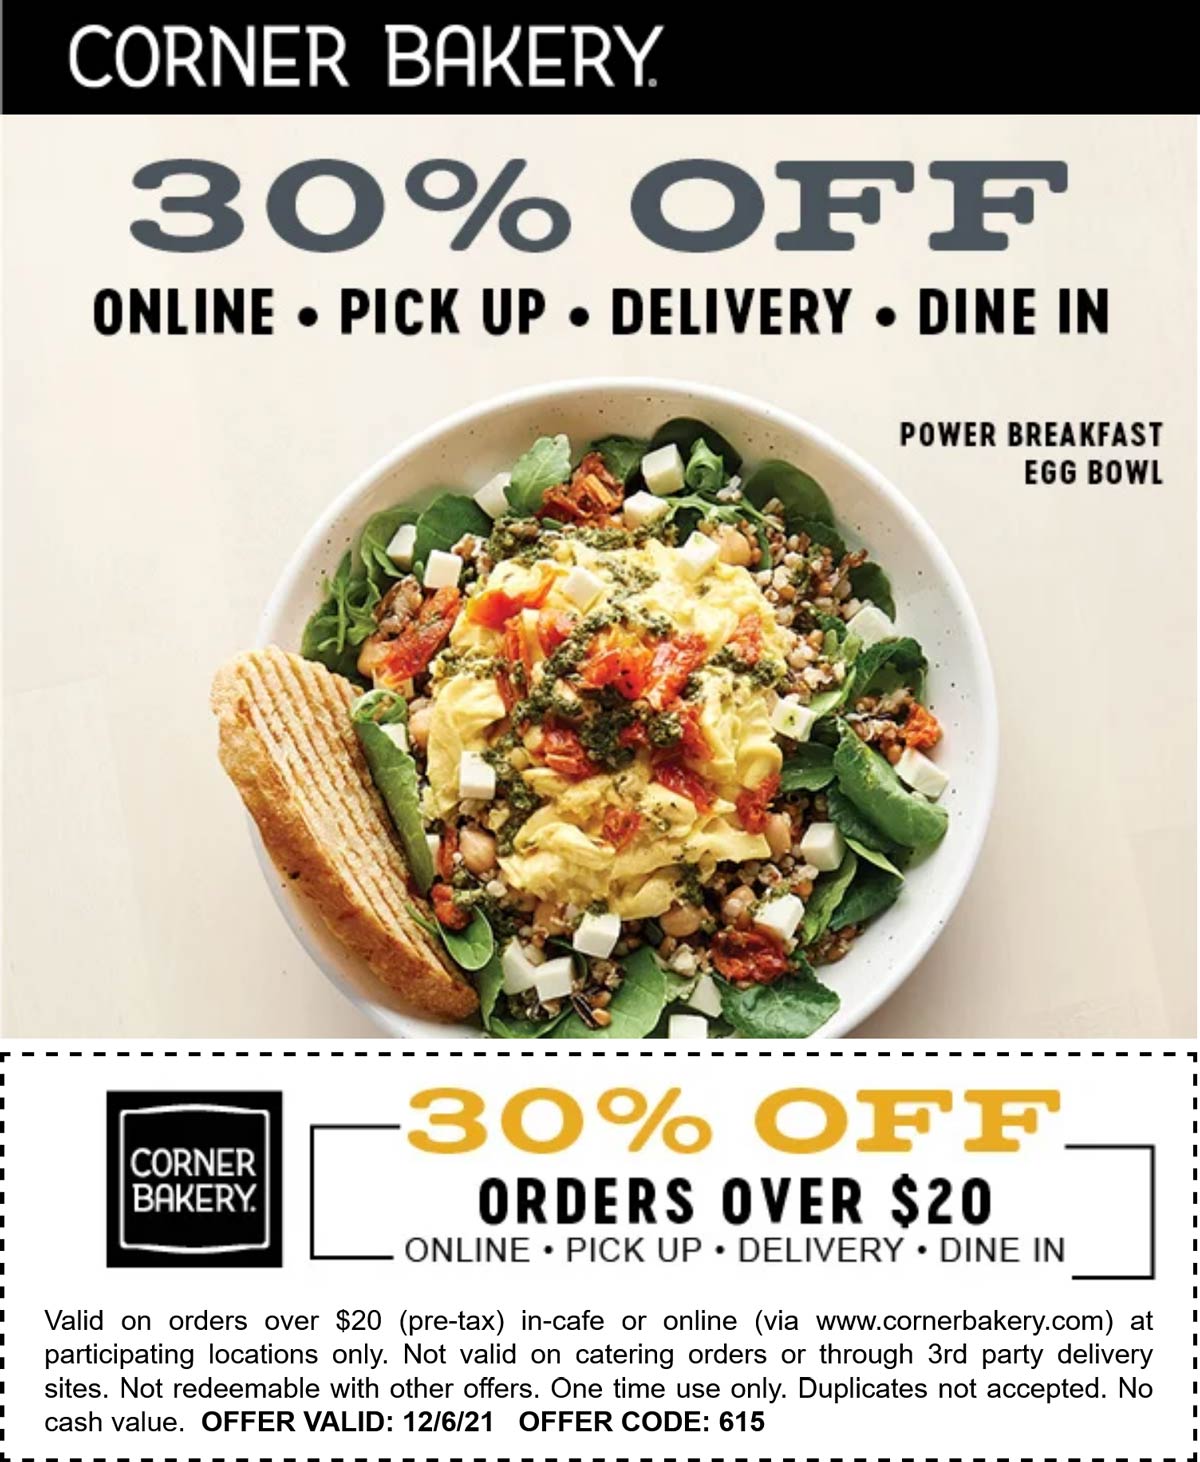 Corner Bakery restaurants Coupon  30% off today at Corner Bakery Cafe restaurants #cornerbakery 